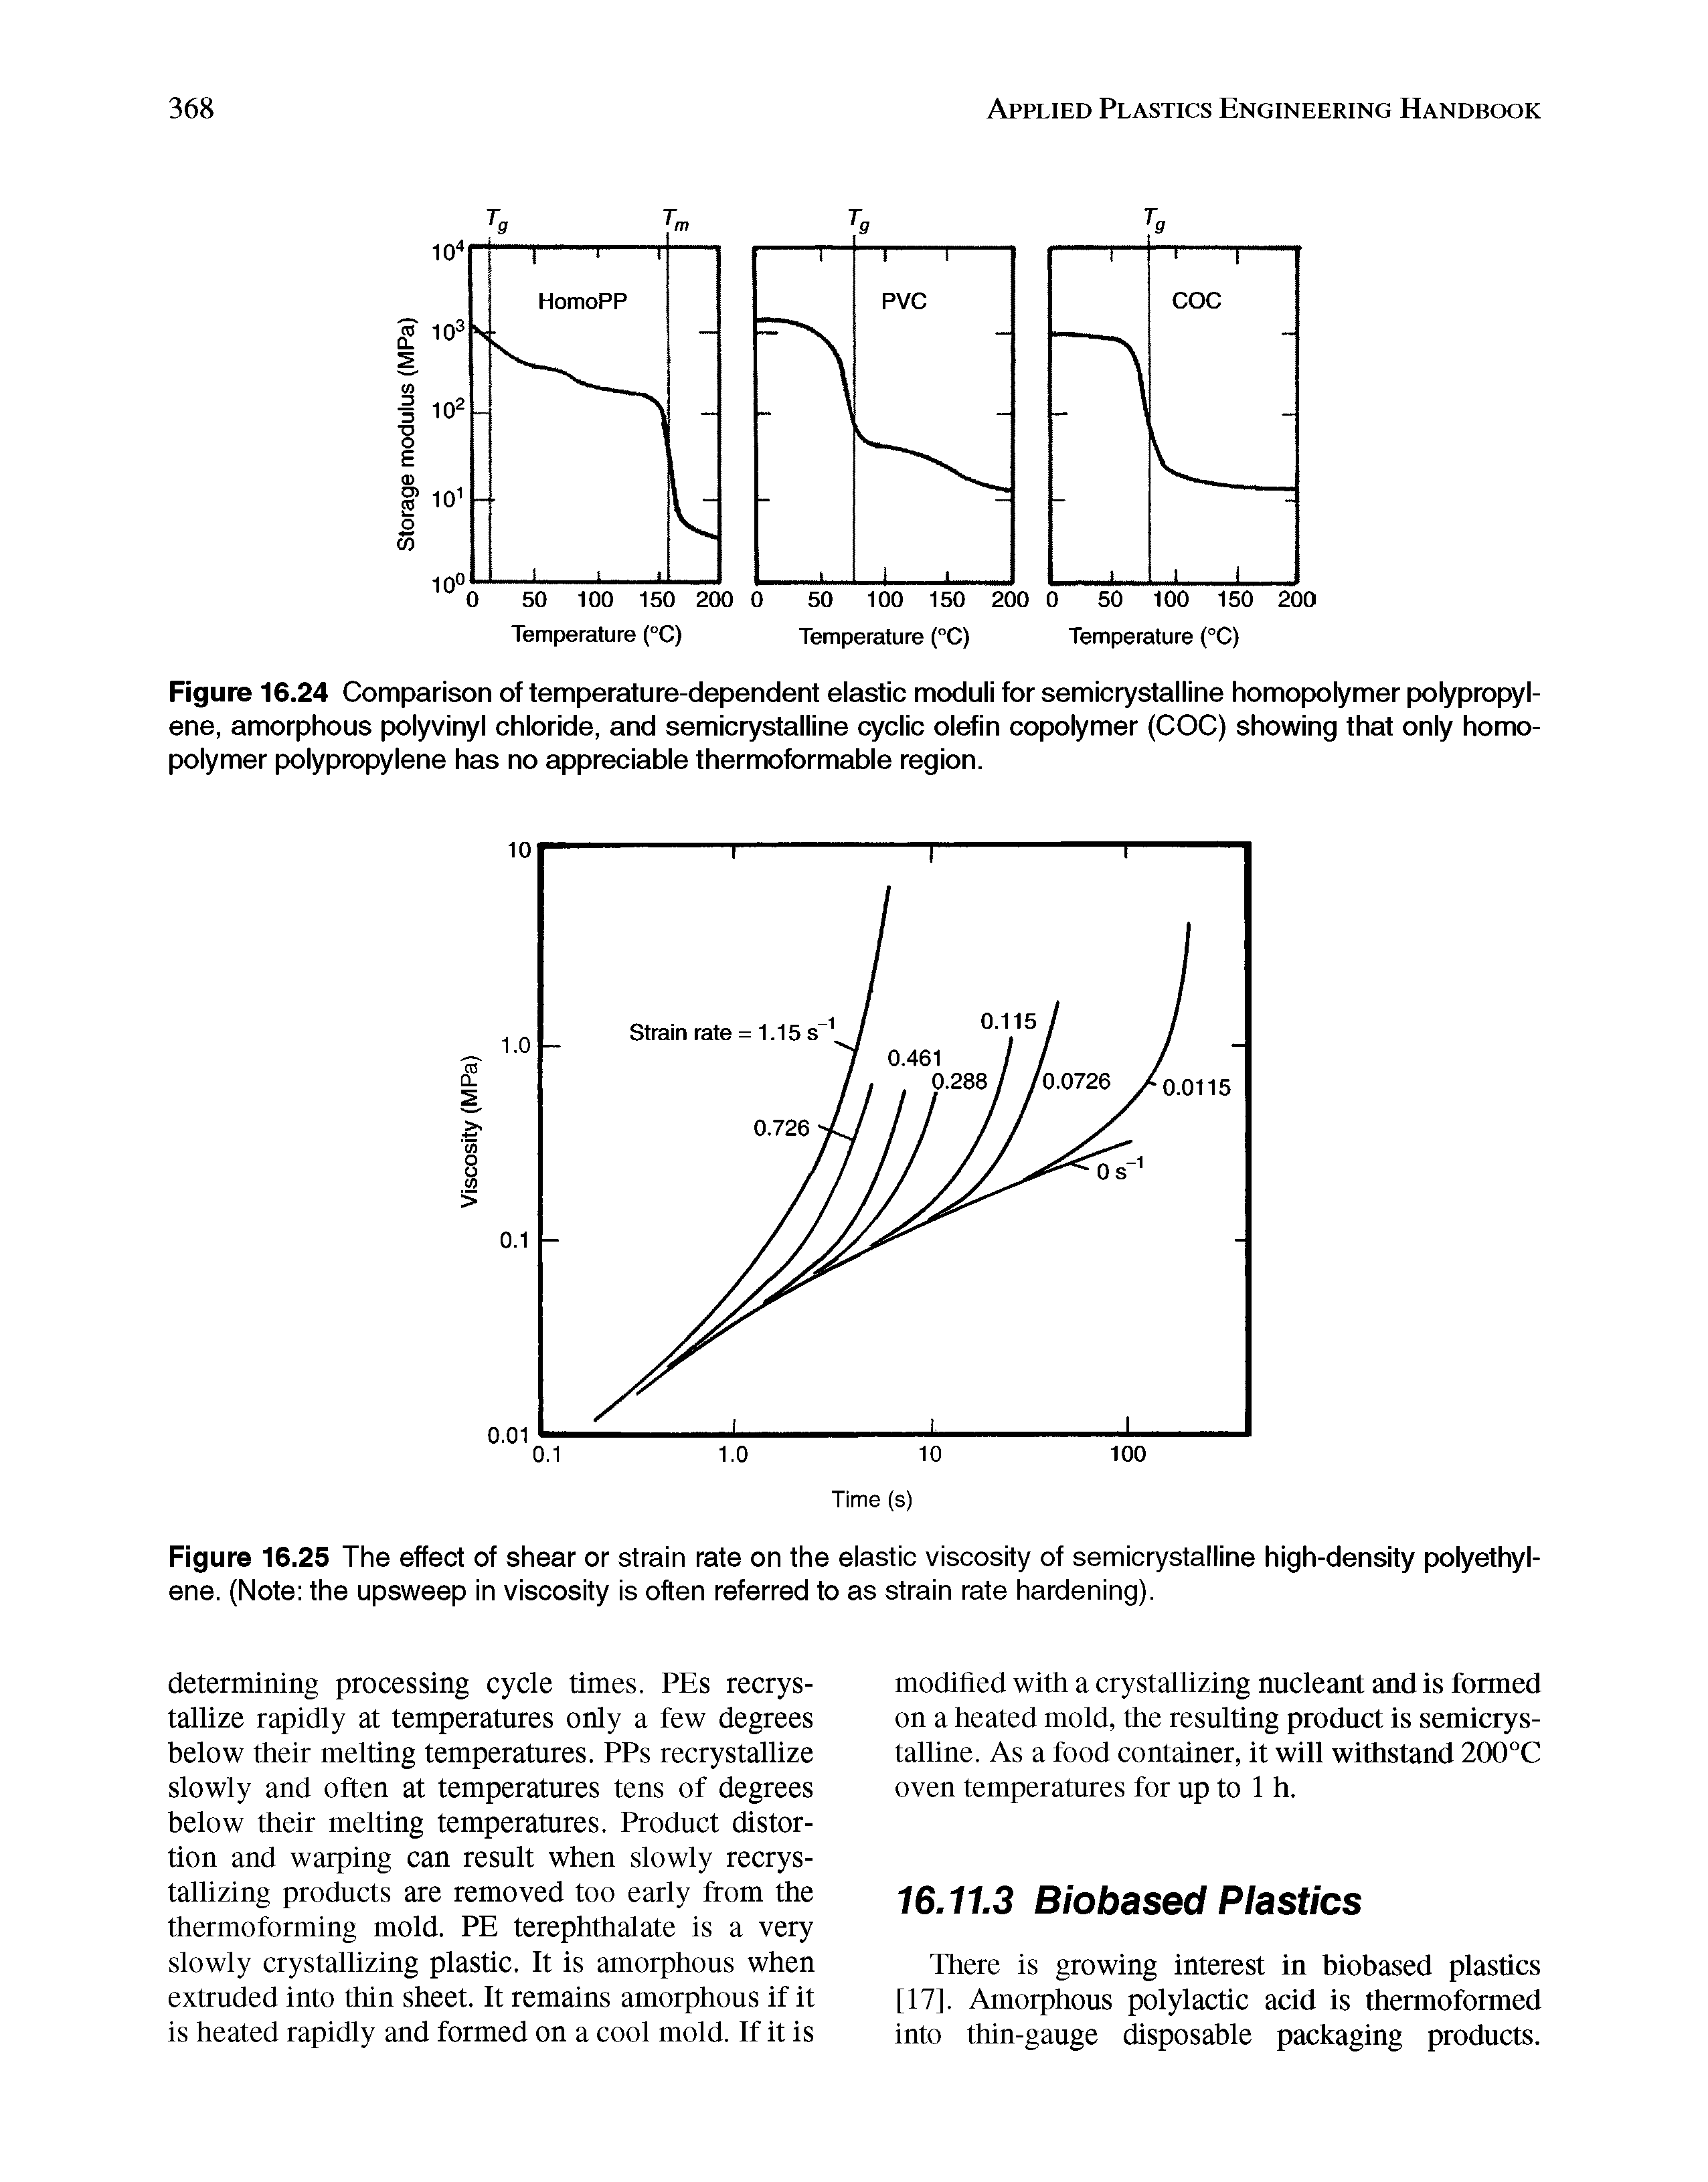 Figure 16.24 Comparison of temperature-dependent elastic moduli for semicrystalline homopolymer polypropylene, amorphous polyvinyl chloride, and semicrystalline cyclic olefin copolymer (COC) showing that only homopolymer polypropylene has no appreciable thermoformable region.